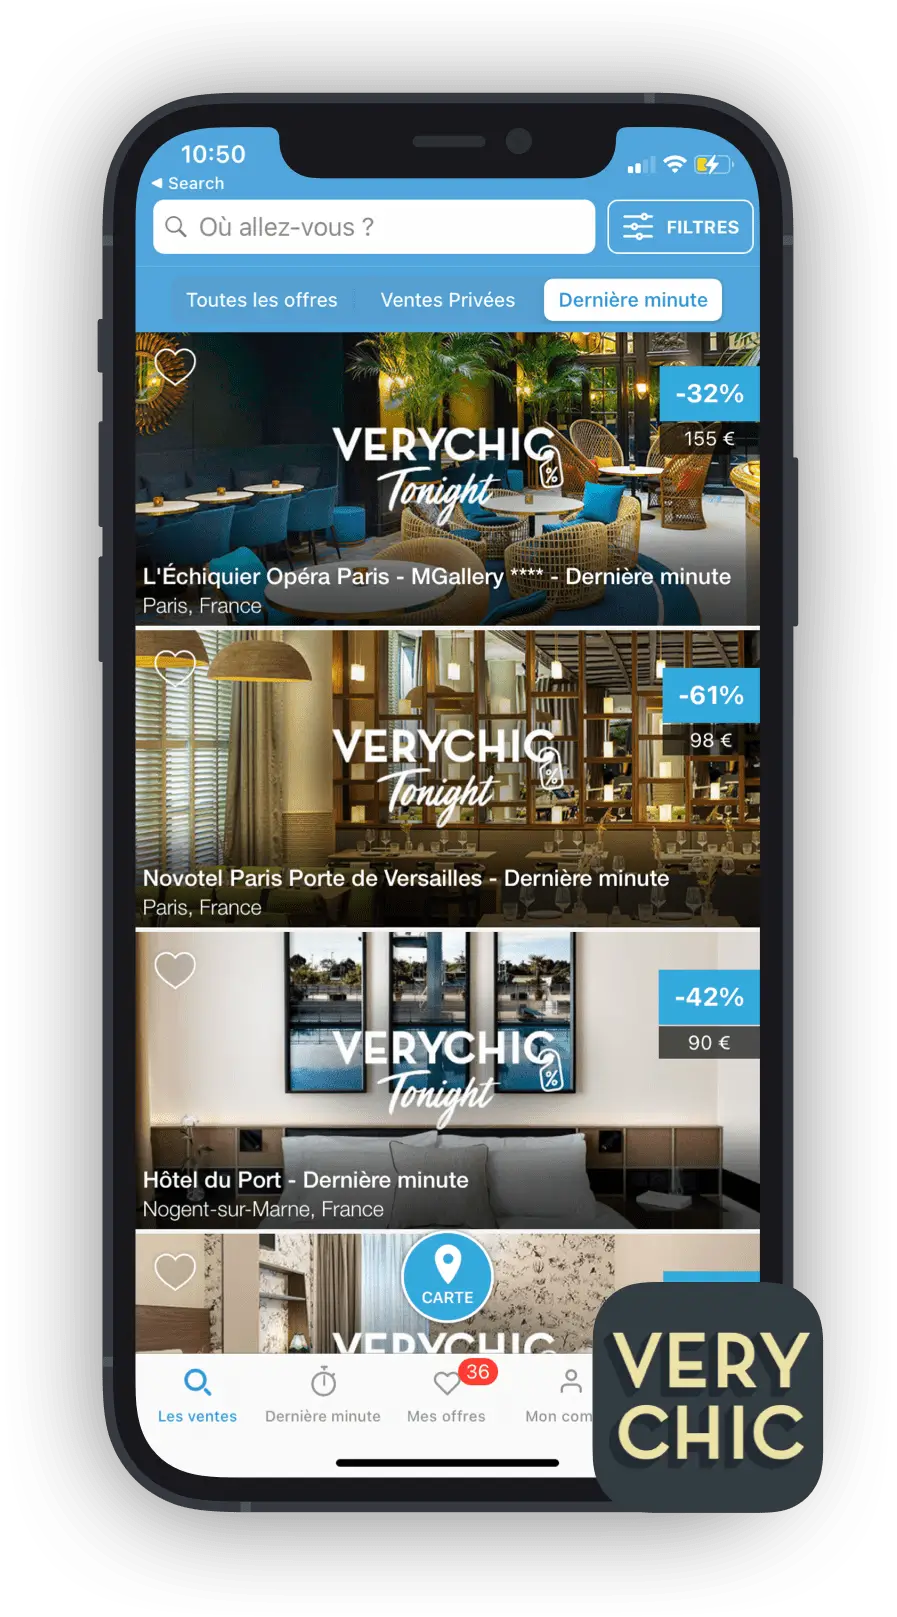 VeryChic's mobile application